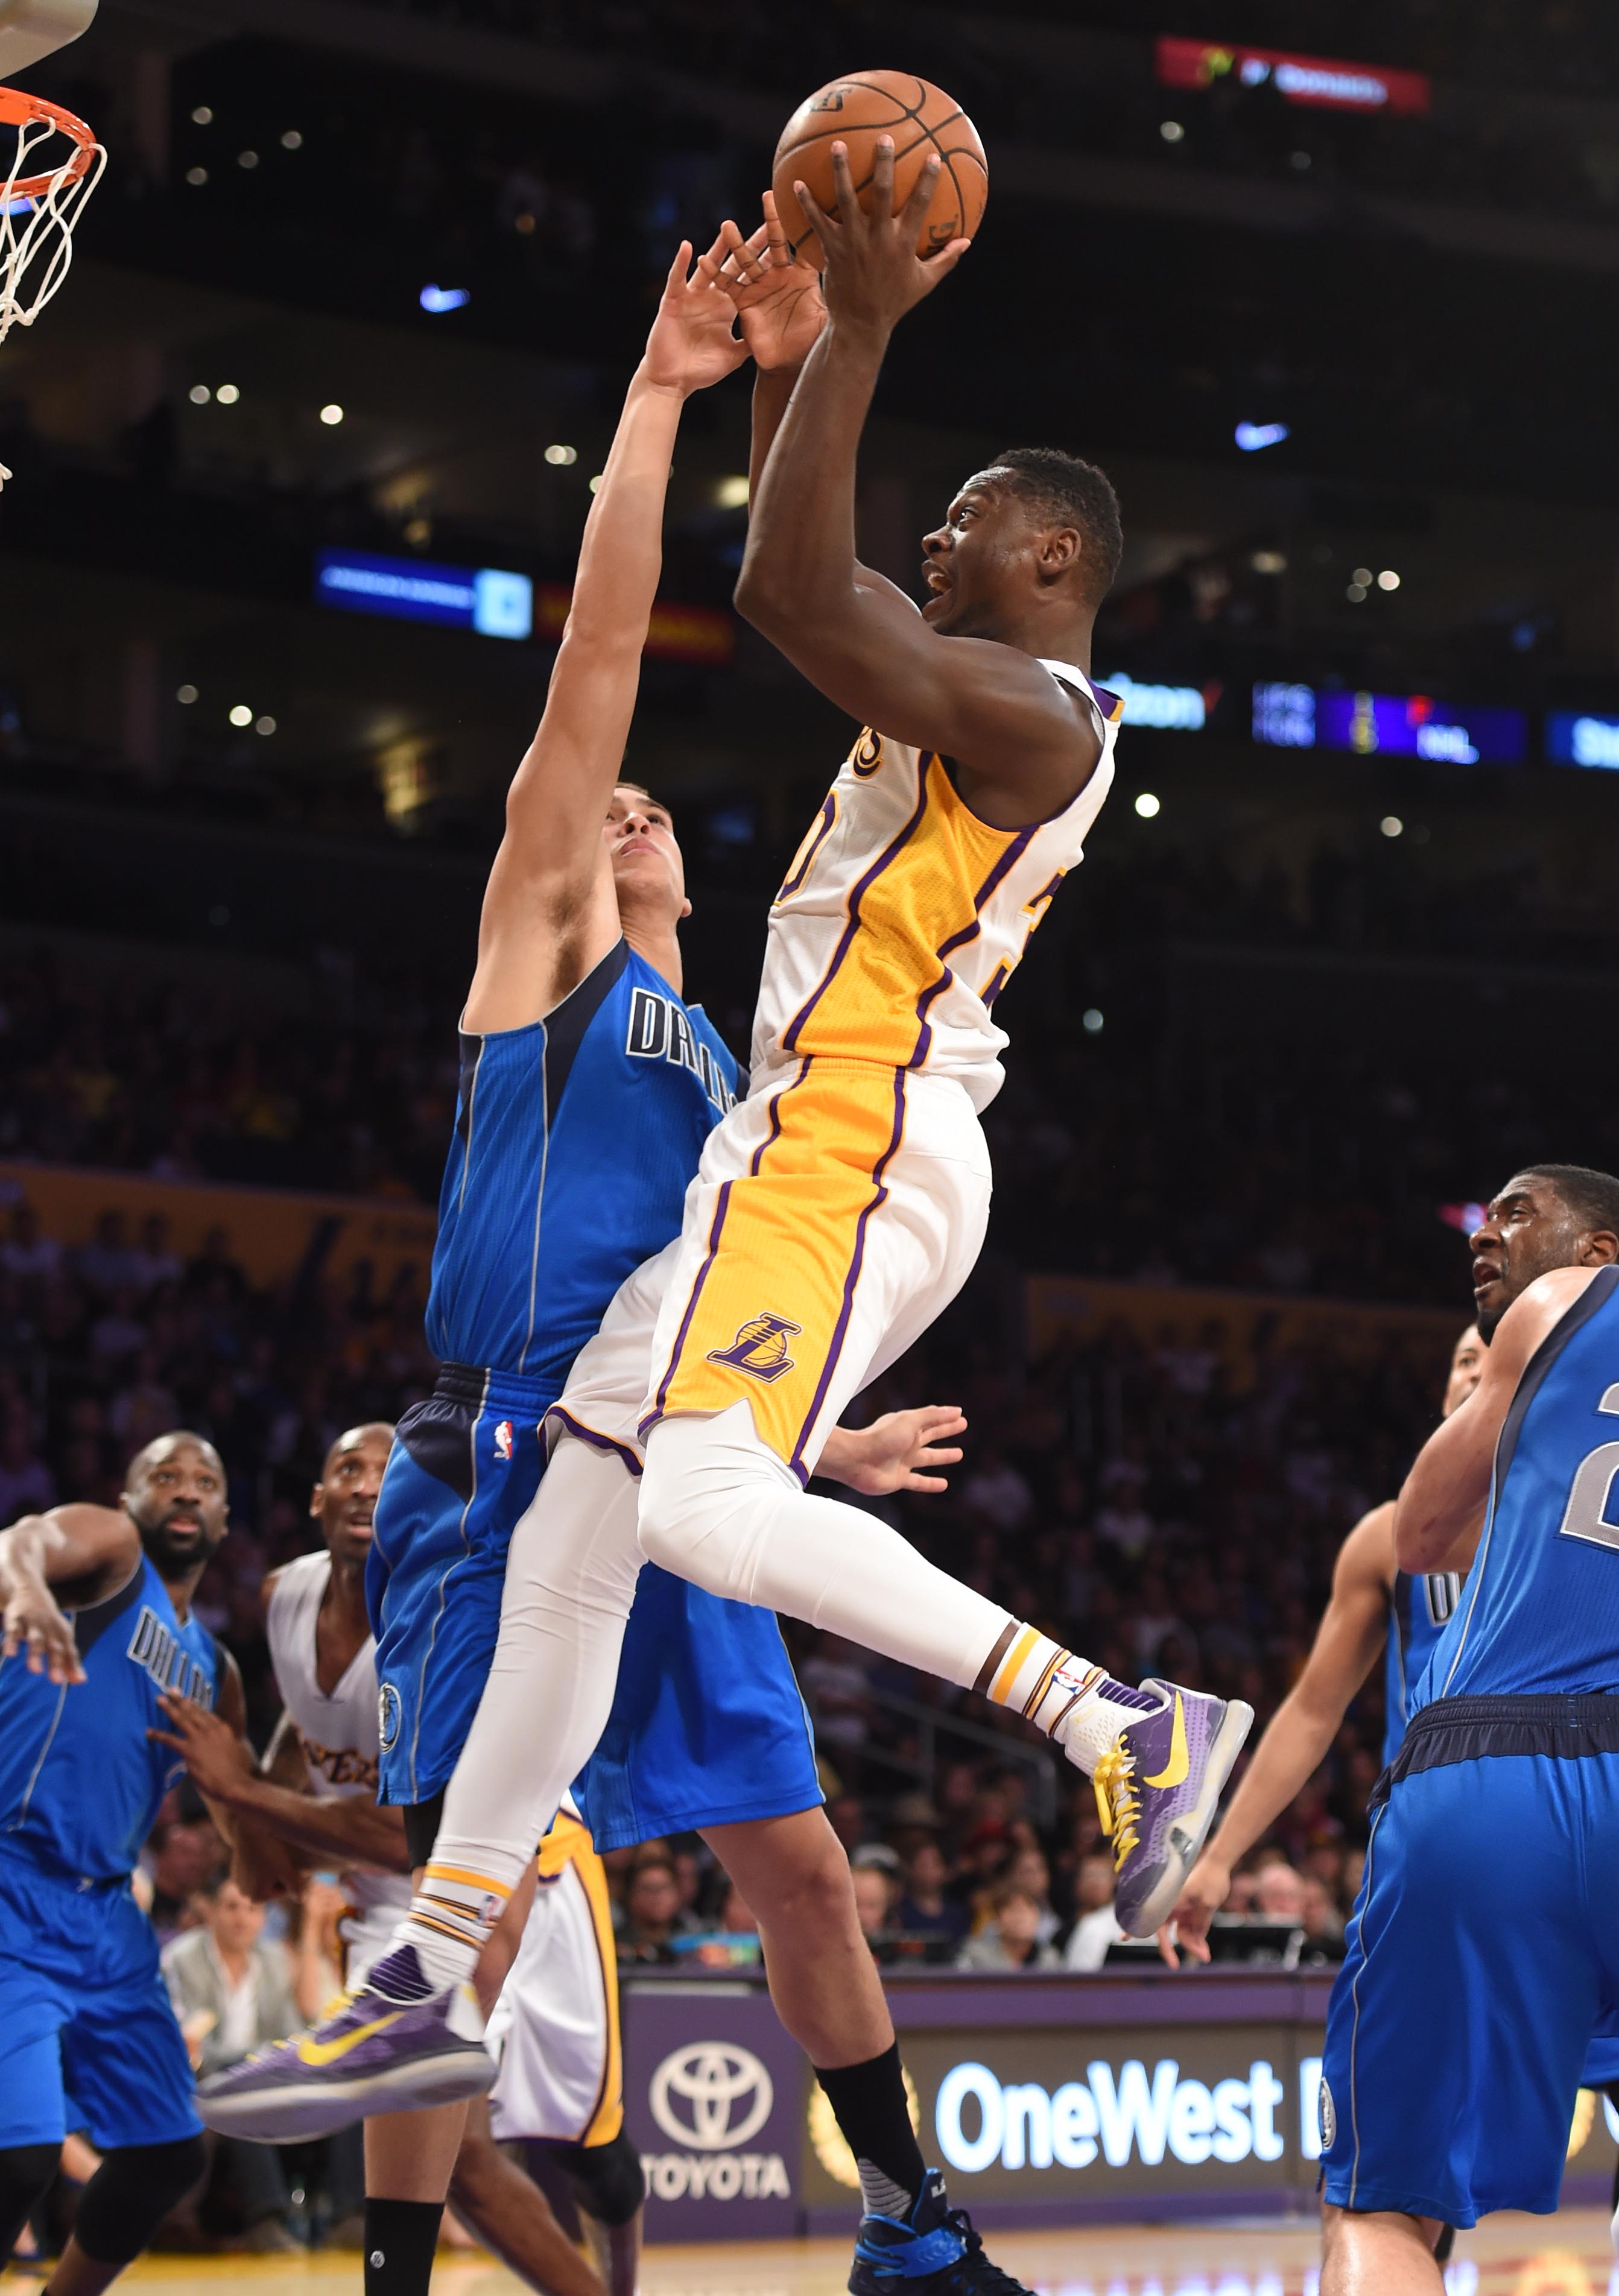 Los Angeles Laker Julius Randle,30, drives to the basket against Dallas Mavericks, during the  2nd quarter at the Staples Center. Dallas won 103-93.   Los Angeles  Sunday,  November,01, 2015.         (Photo by Stephen Carr / Daily Breeze)